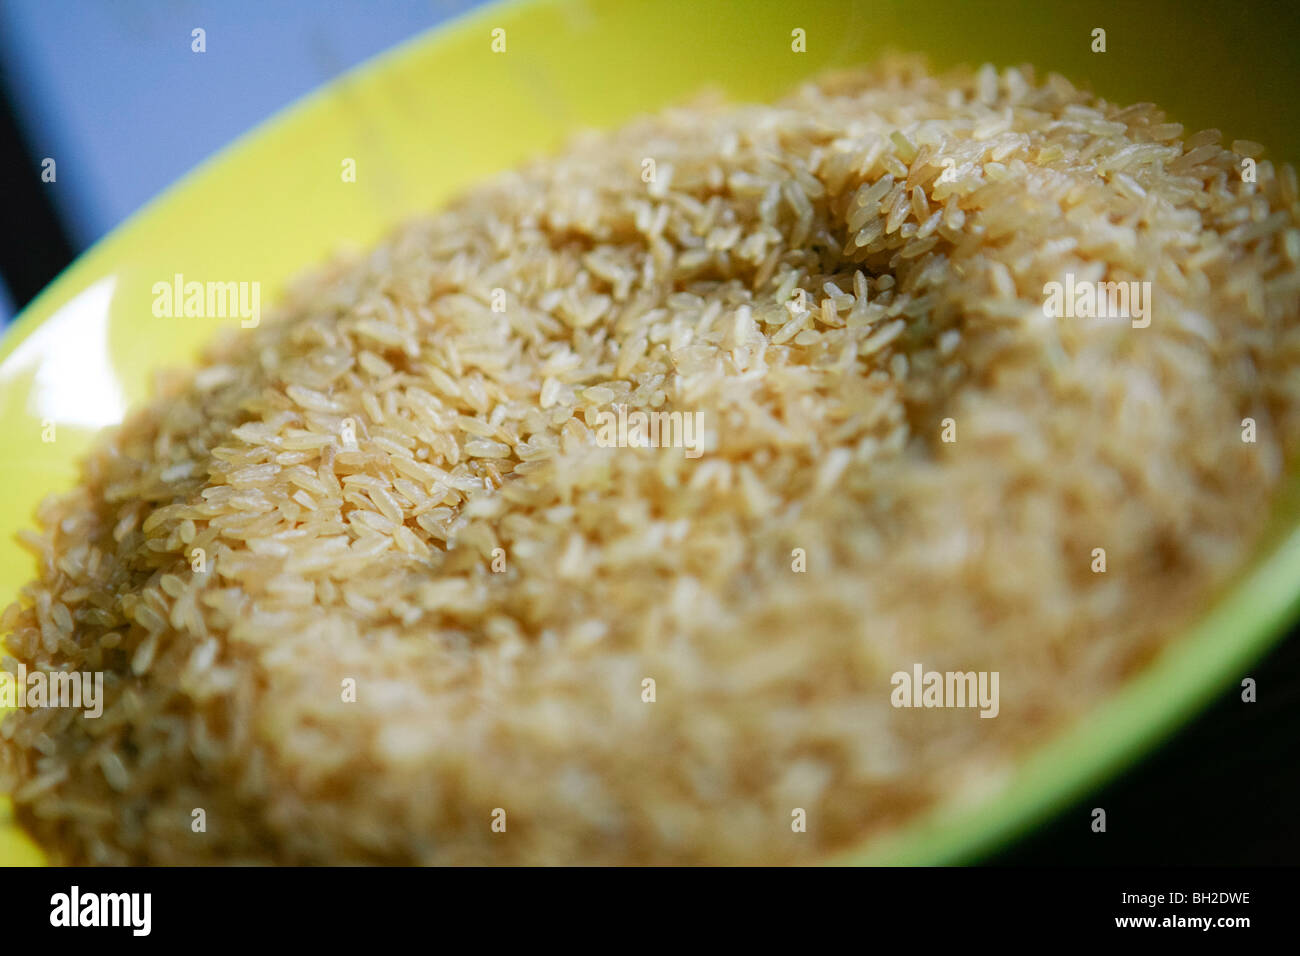 Yellow plate filled with brown rice Stock Photo